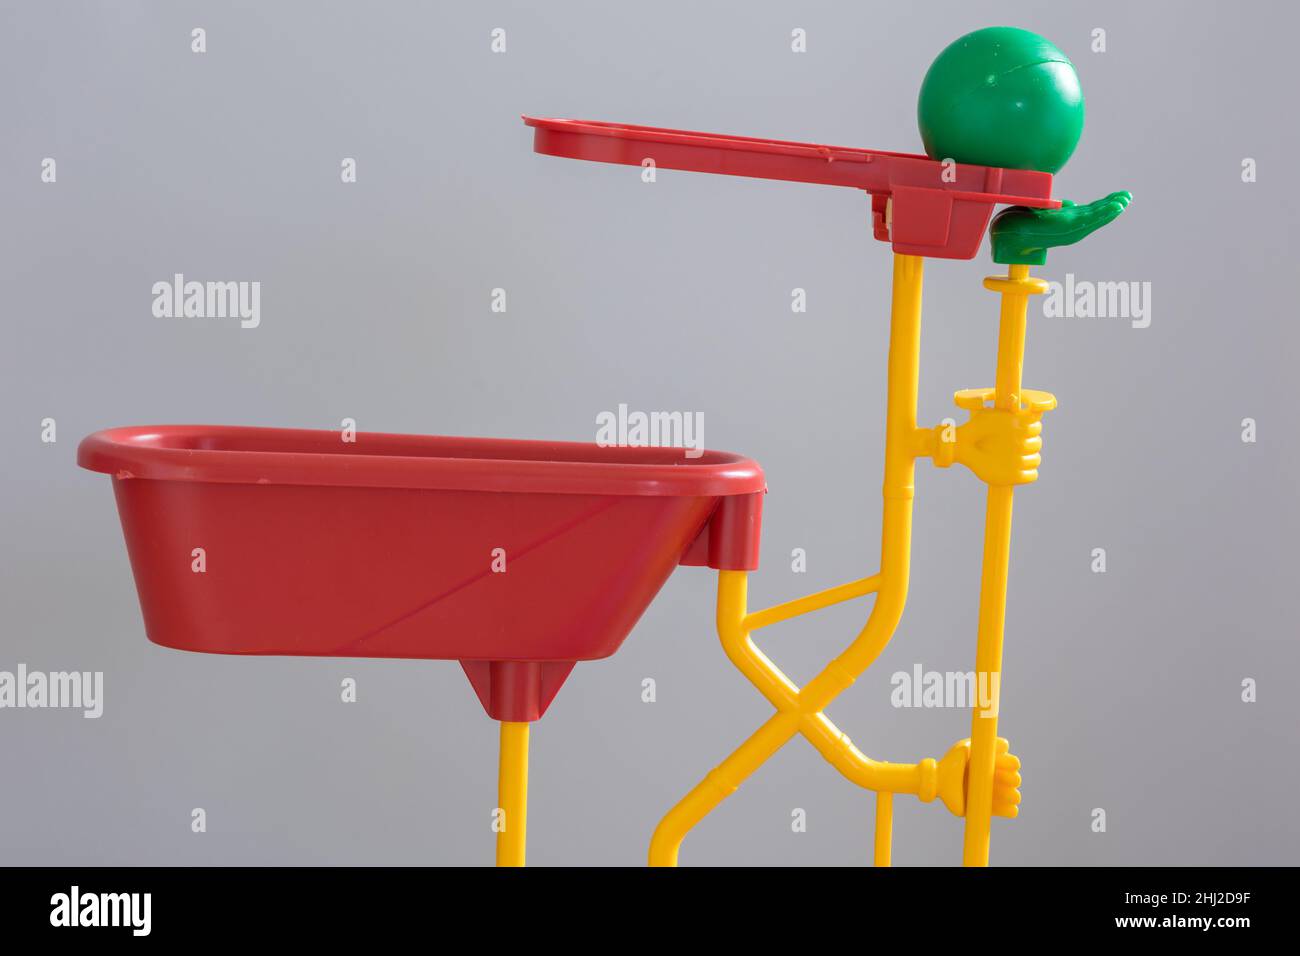 A close up of the green bowling ball resting above the Green helping Hand supported by the yellow plumbing., which connects to the red bath. Stock Photo